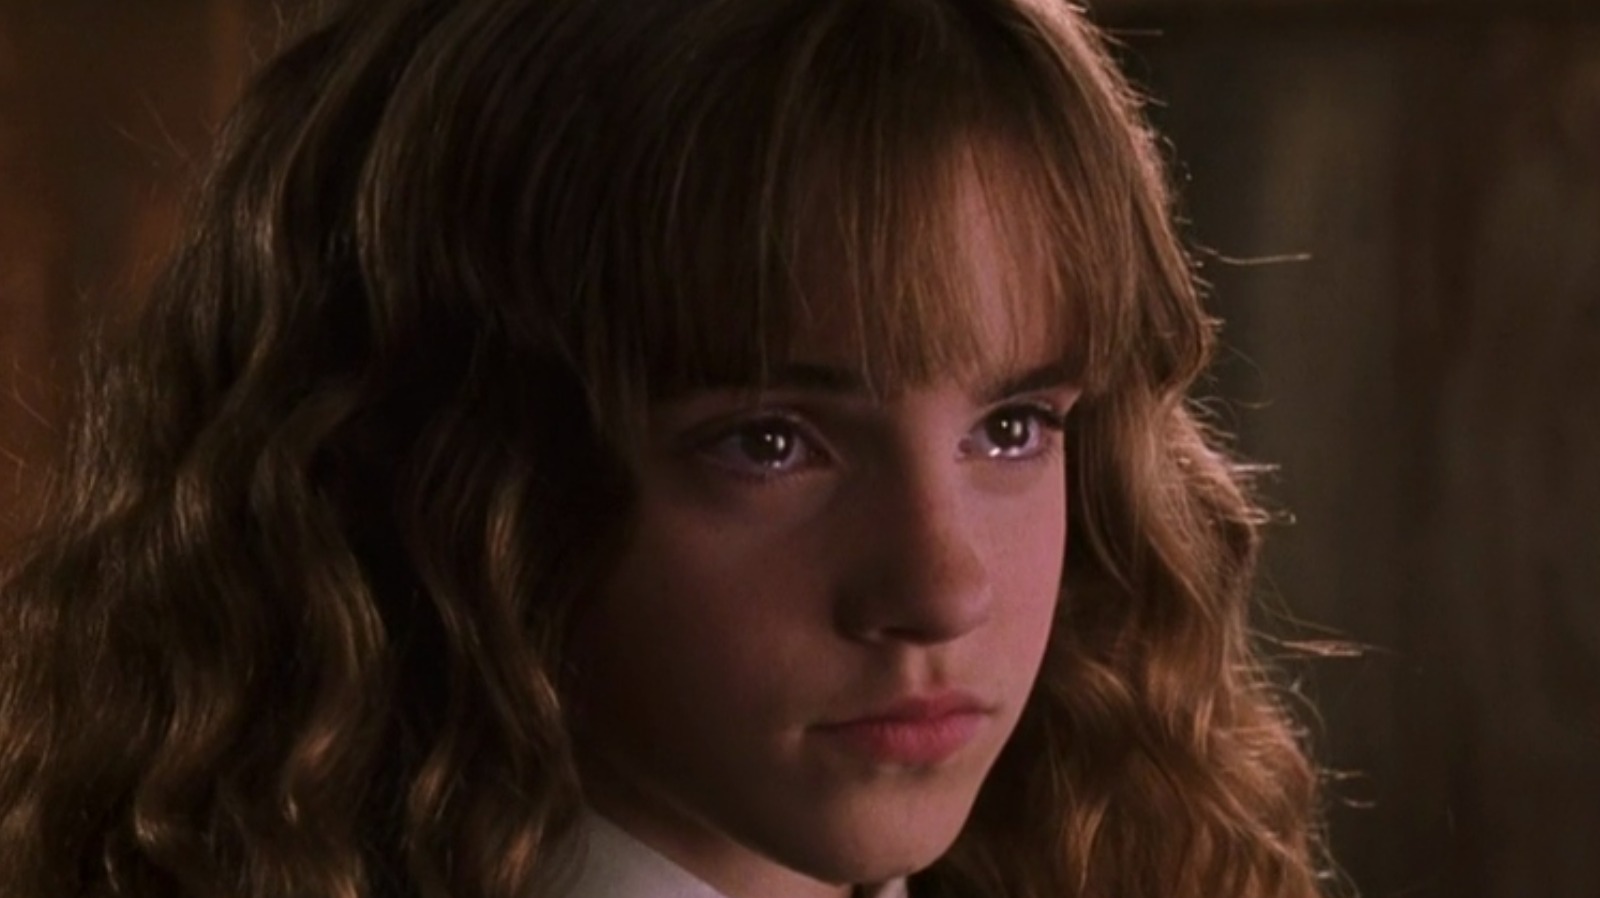 https://www.looper.com/img/gallery/what-fans-dont-know-about-hermione-granger/l-intro-1652128281.jpg